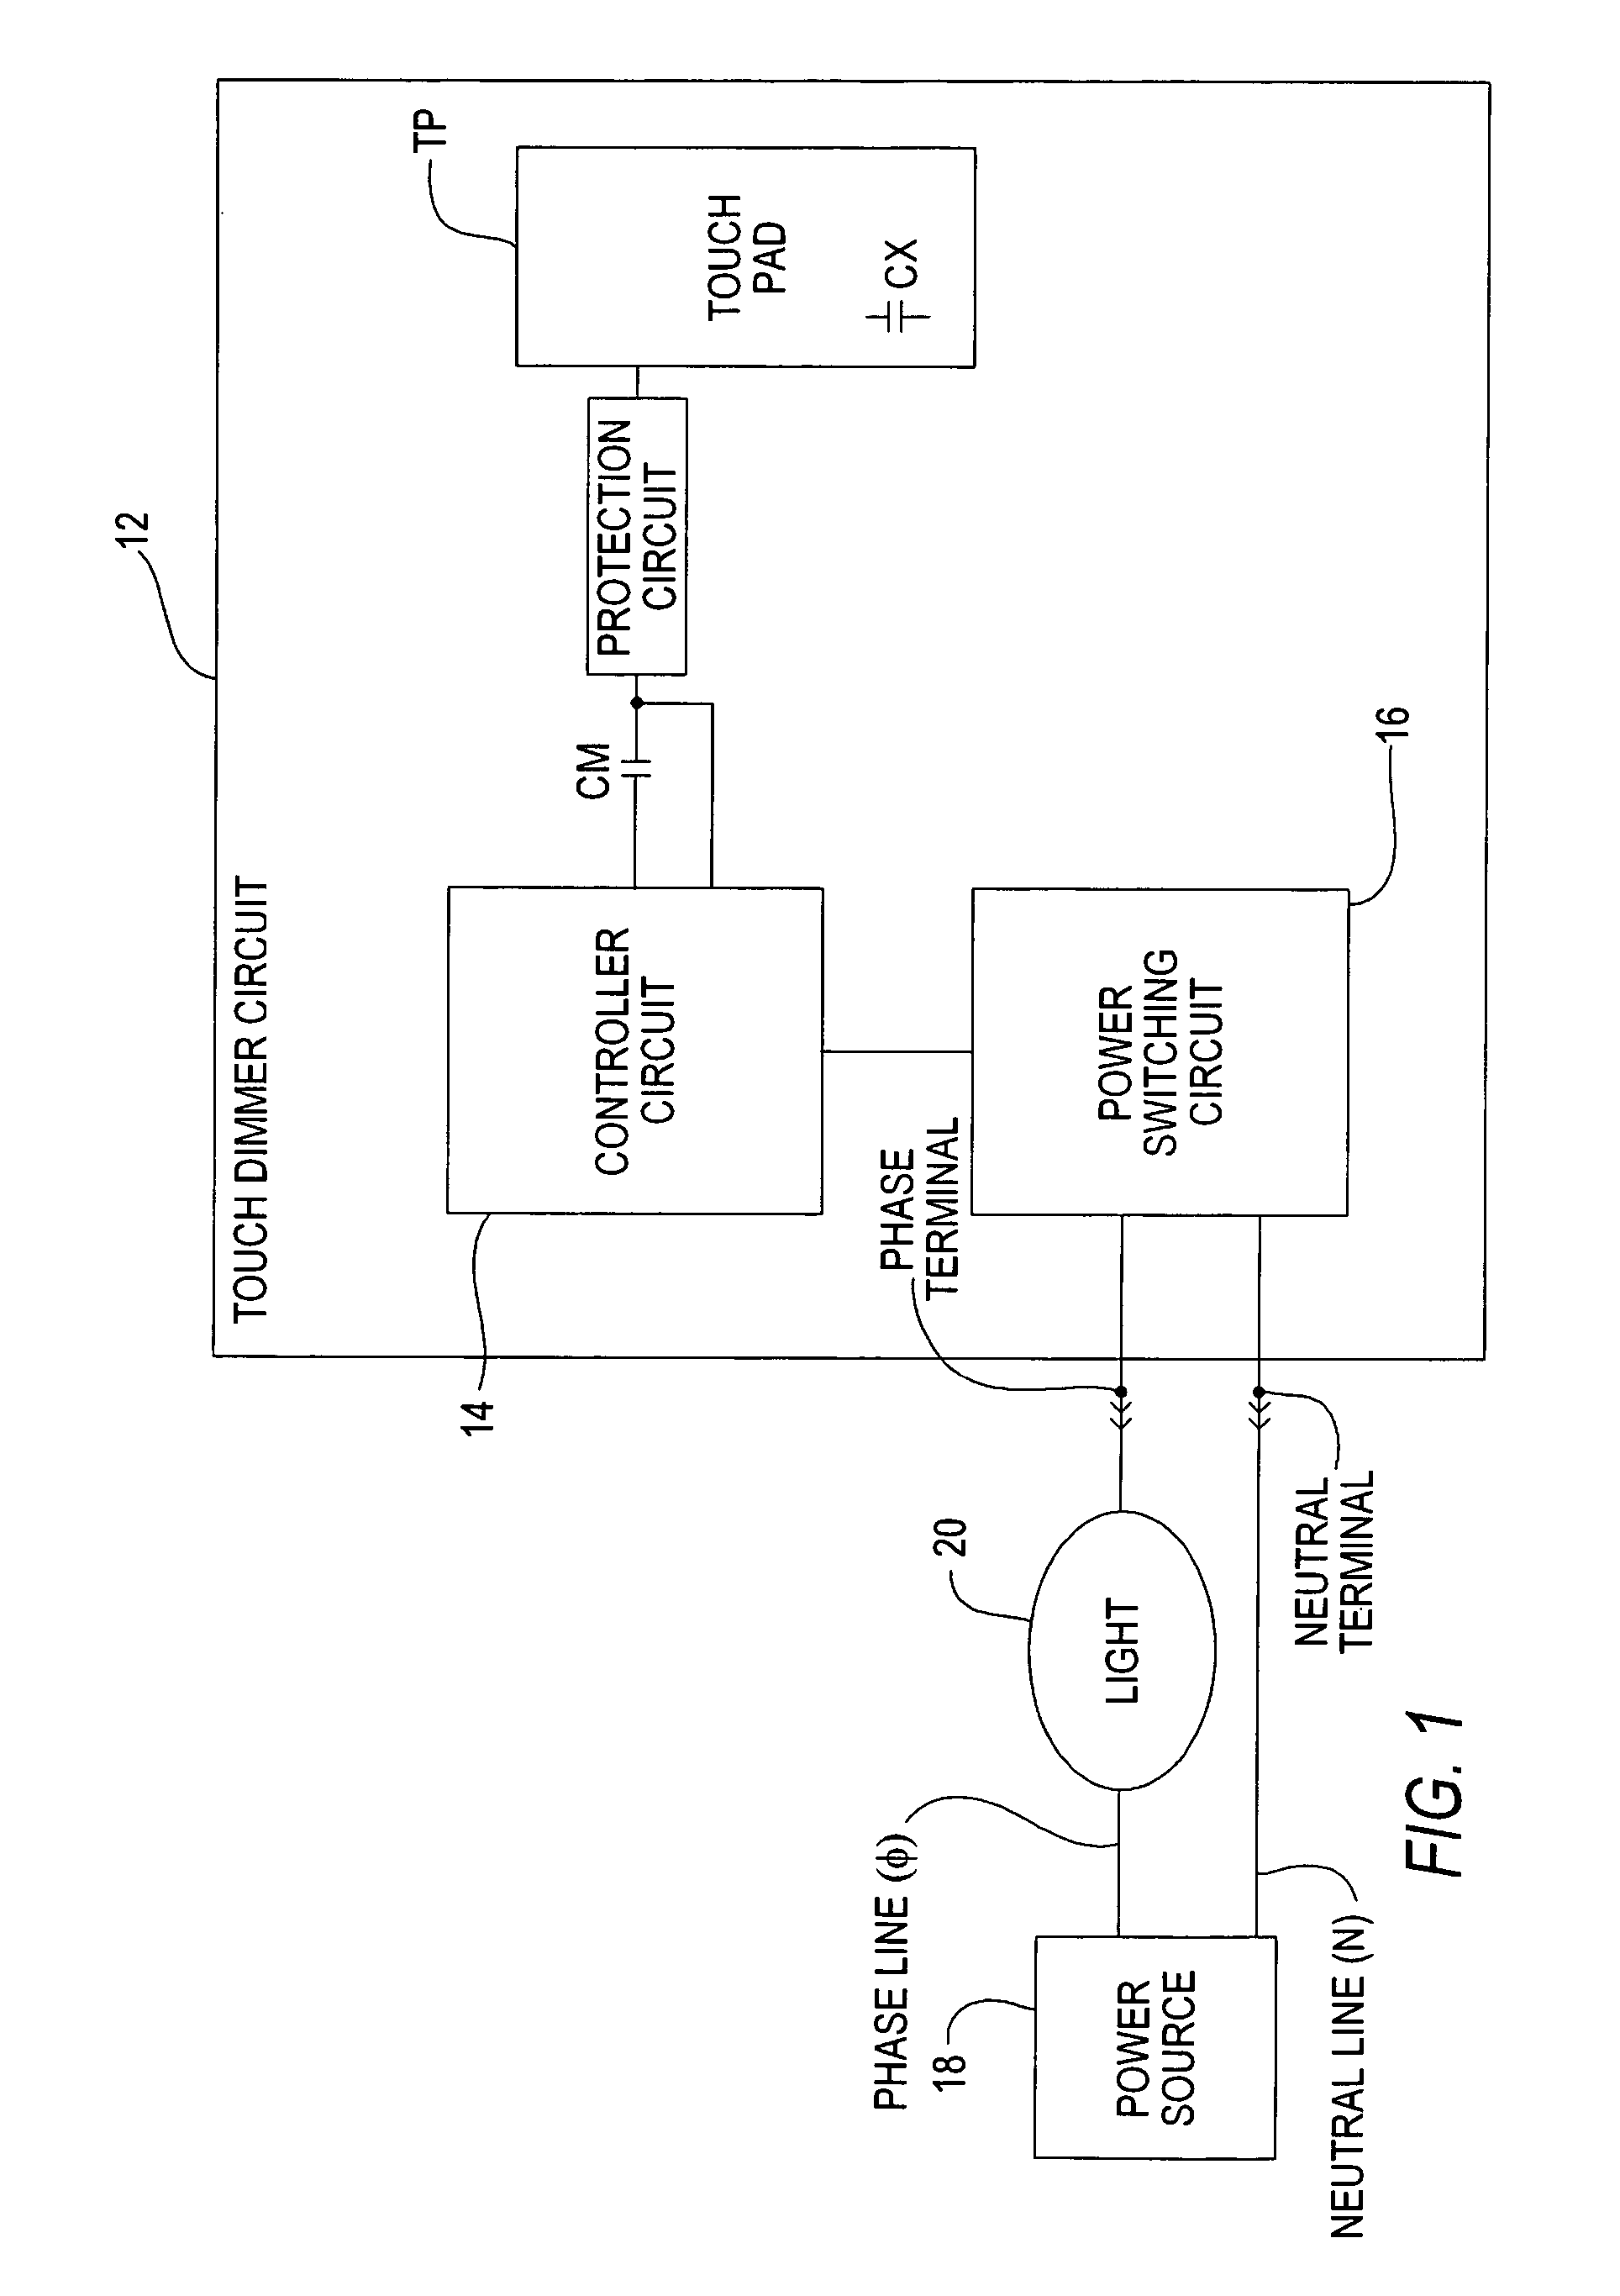 Capacitive sense toggle touch dimmer